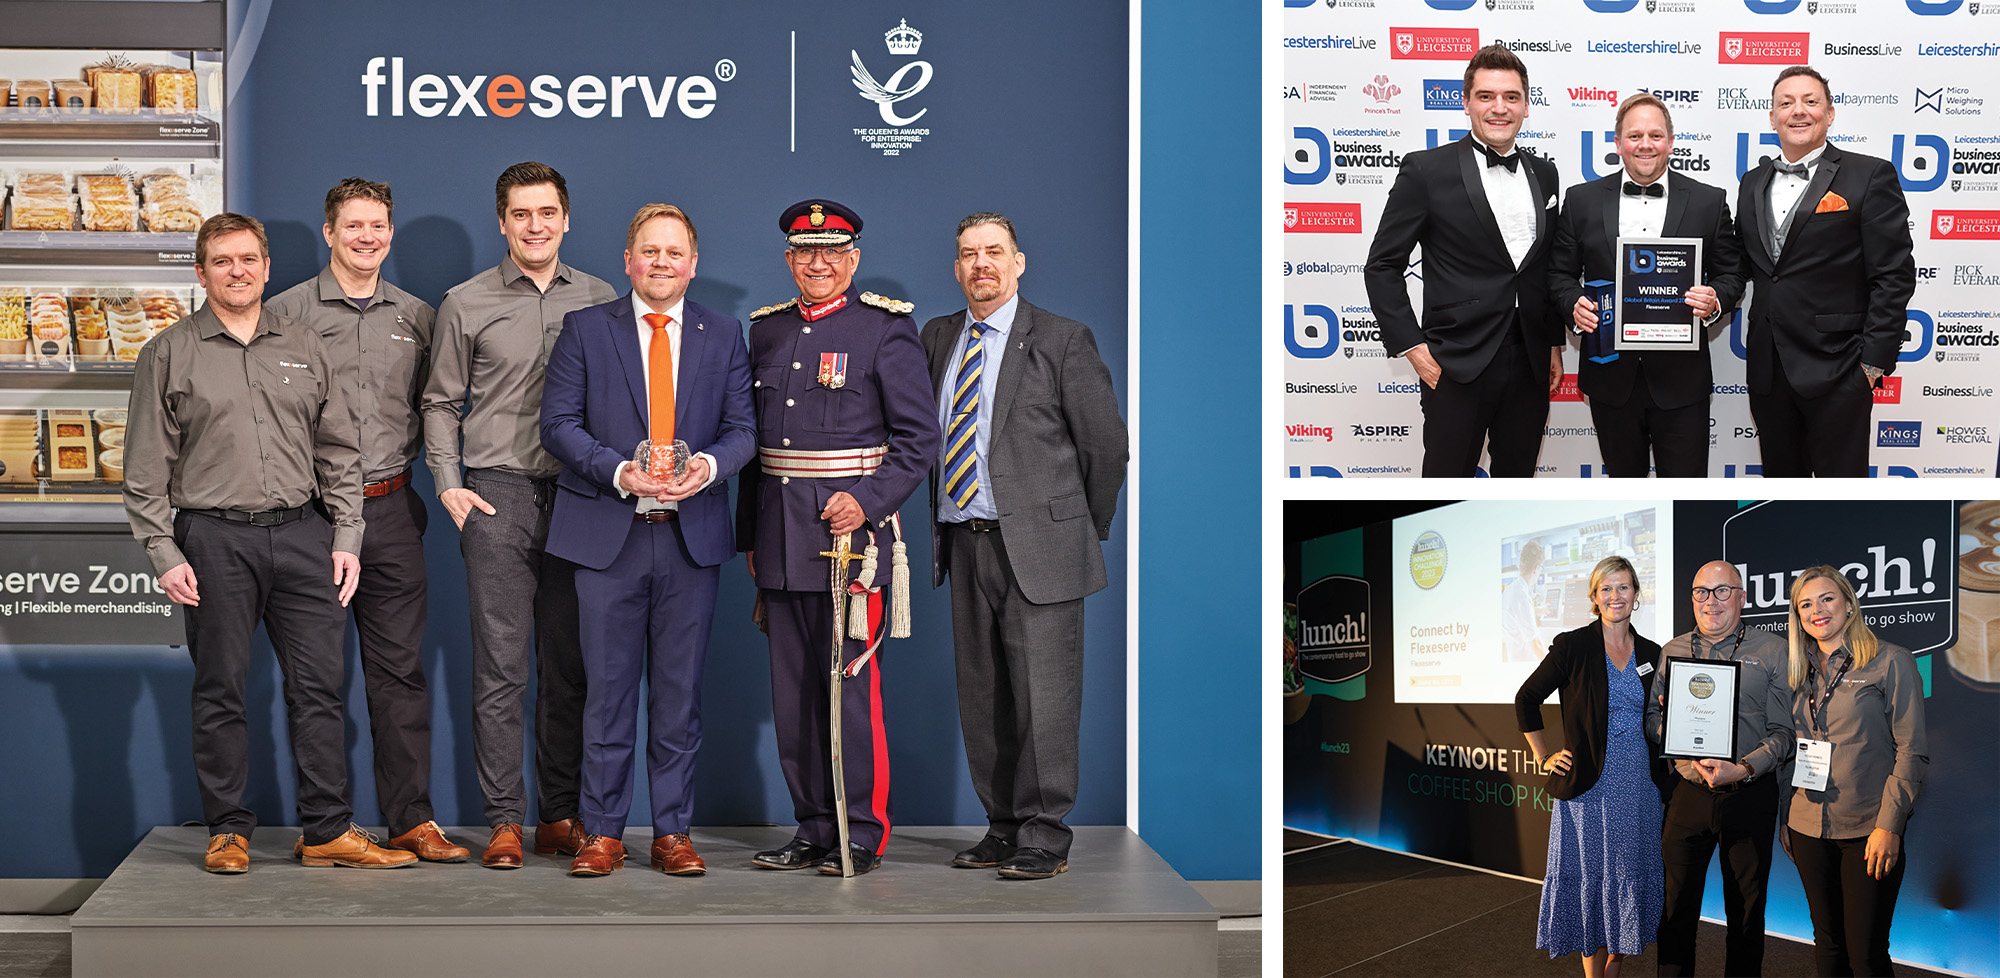 Flexeserve's award presentations for the Queen's Award for Innovation 2022, LeicestershireLive Business Awards 2023 and lunch! Show Gold Innovation Award 